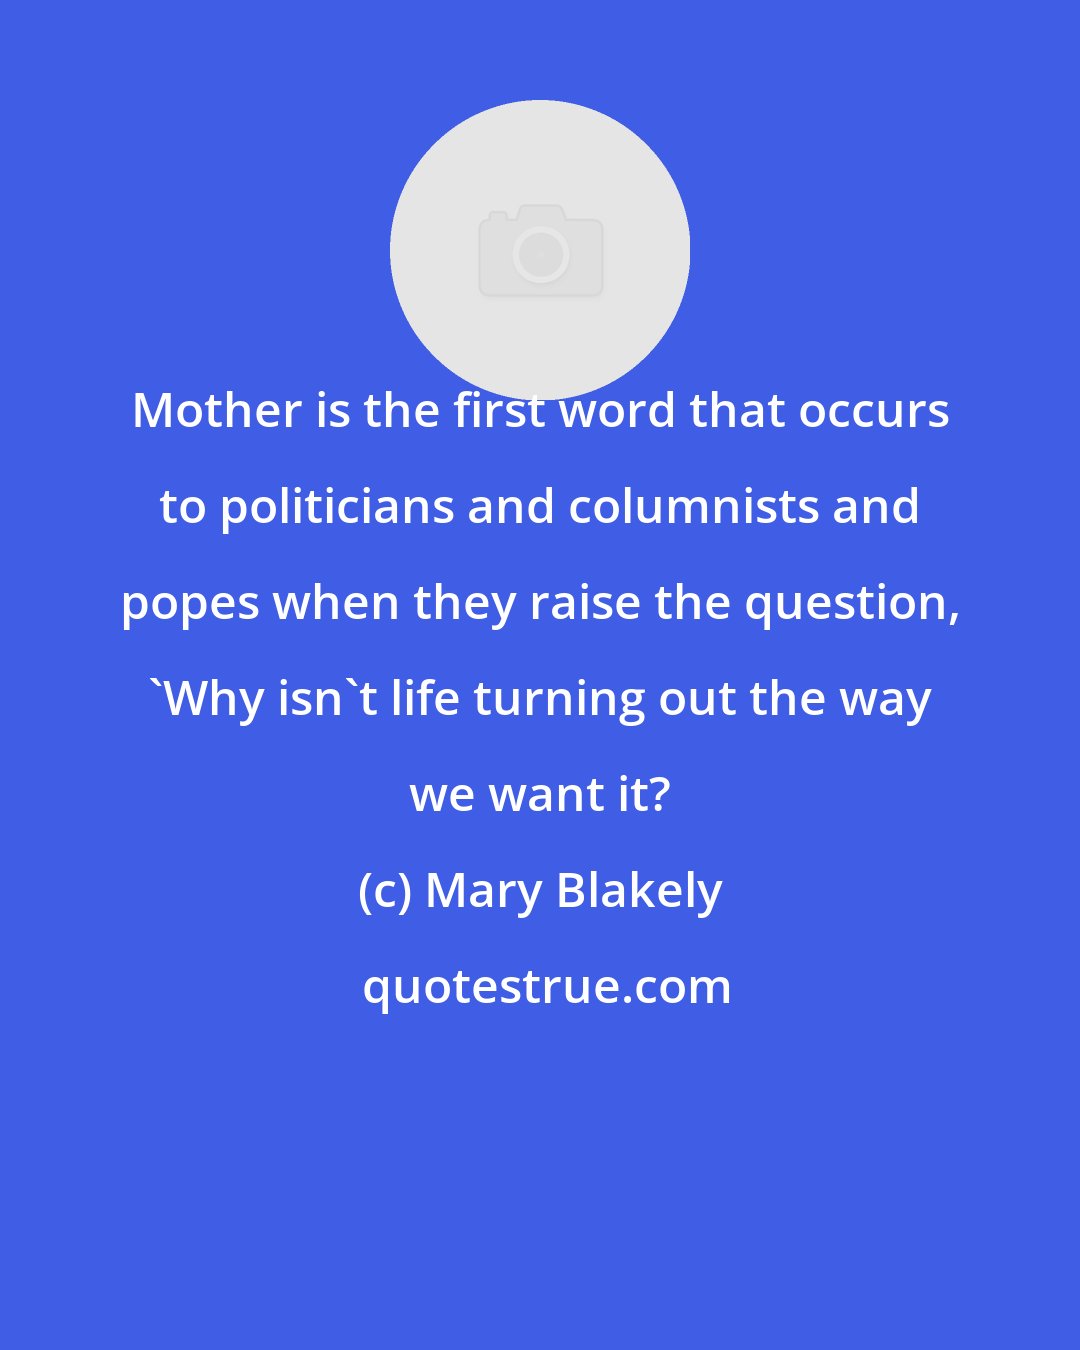 Mary Blakely: Mother is the first word that occurs to politicians and columnists and popes when they raise the question, 'Why isn't life turning out the way we want it?